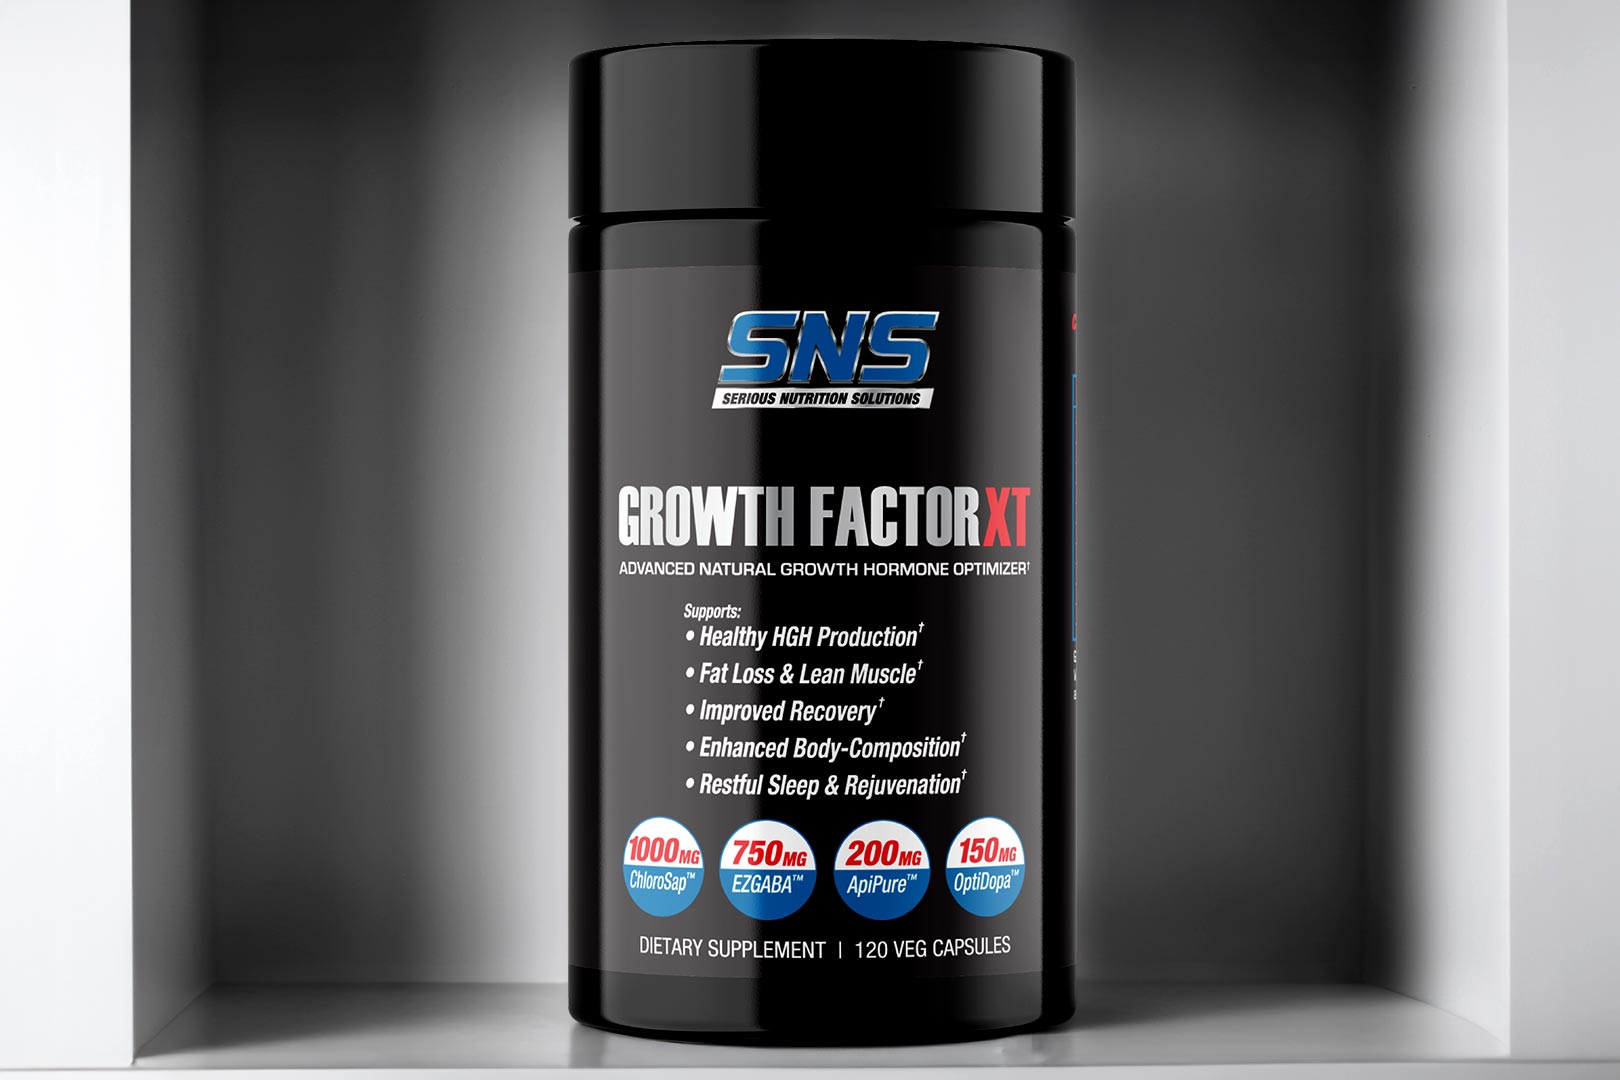 Serious Nutrition Solutions Growth Factor Xt